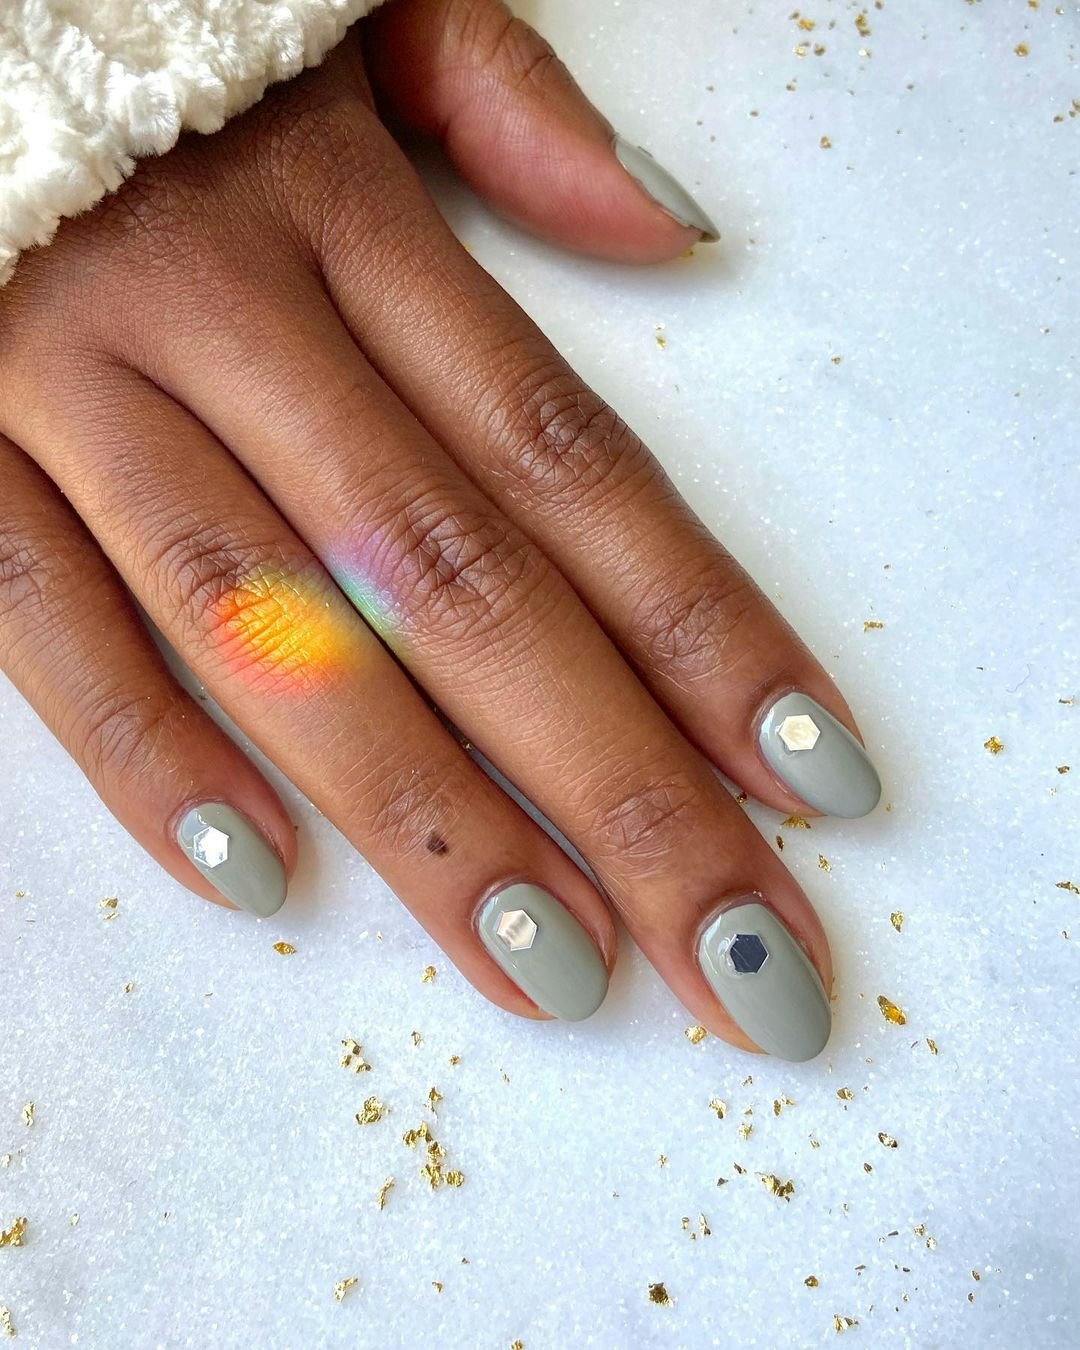 Where to Get the Best Nail Art in and Around Denver - 5280